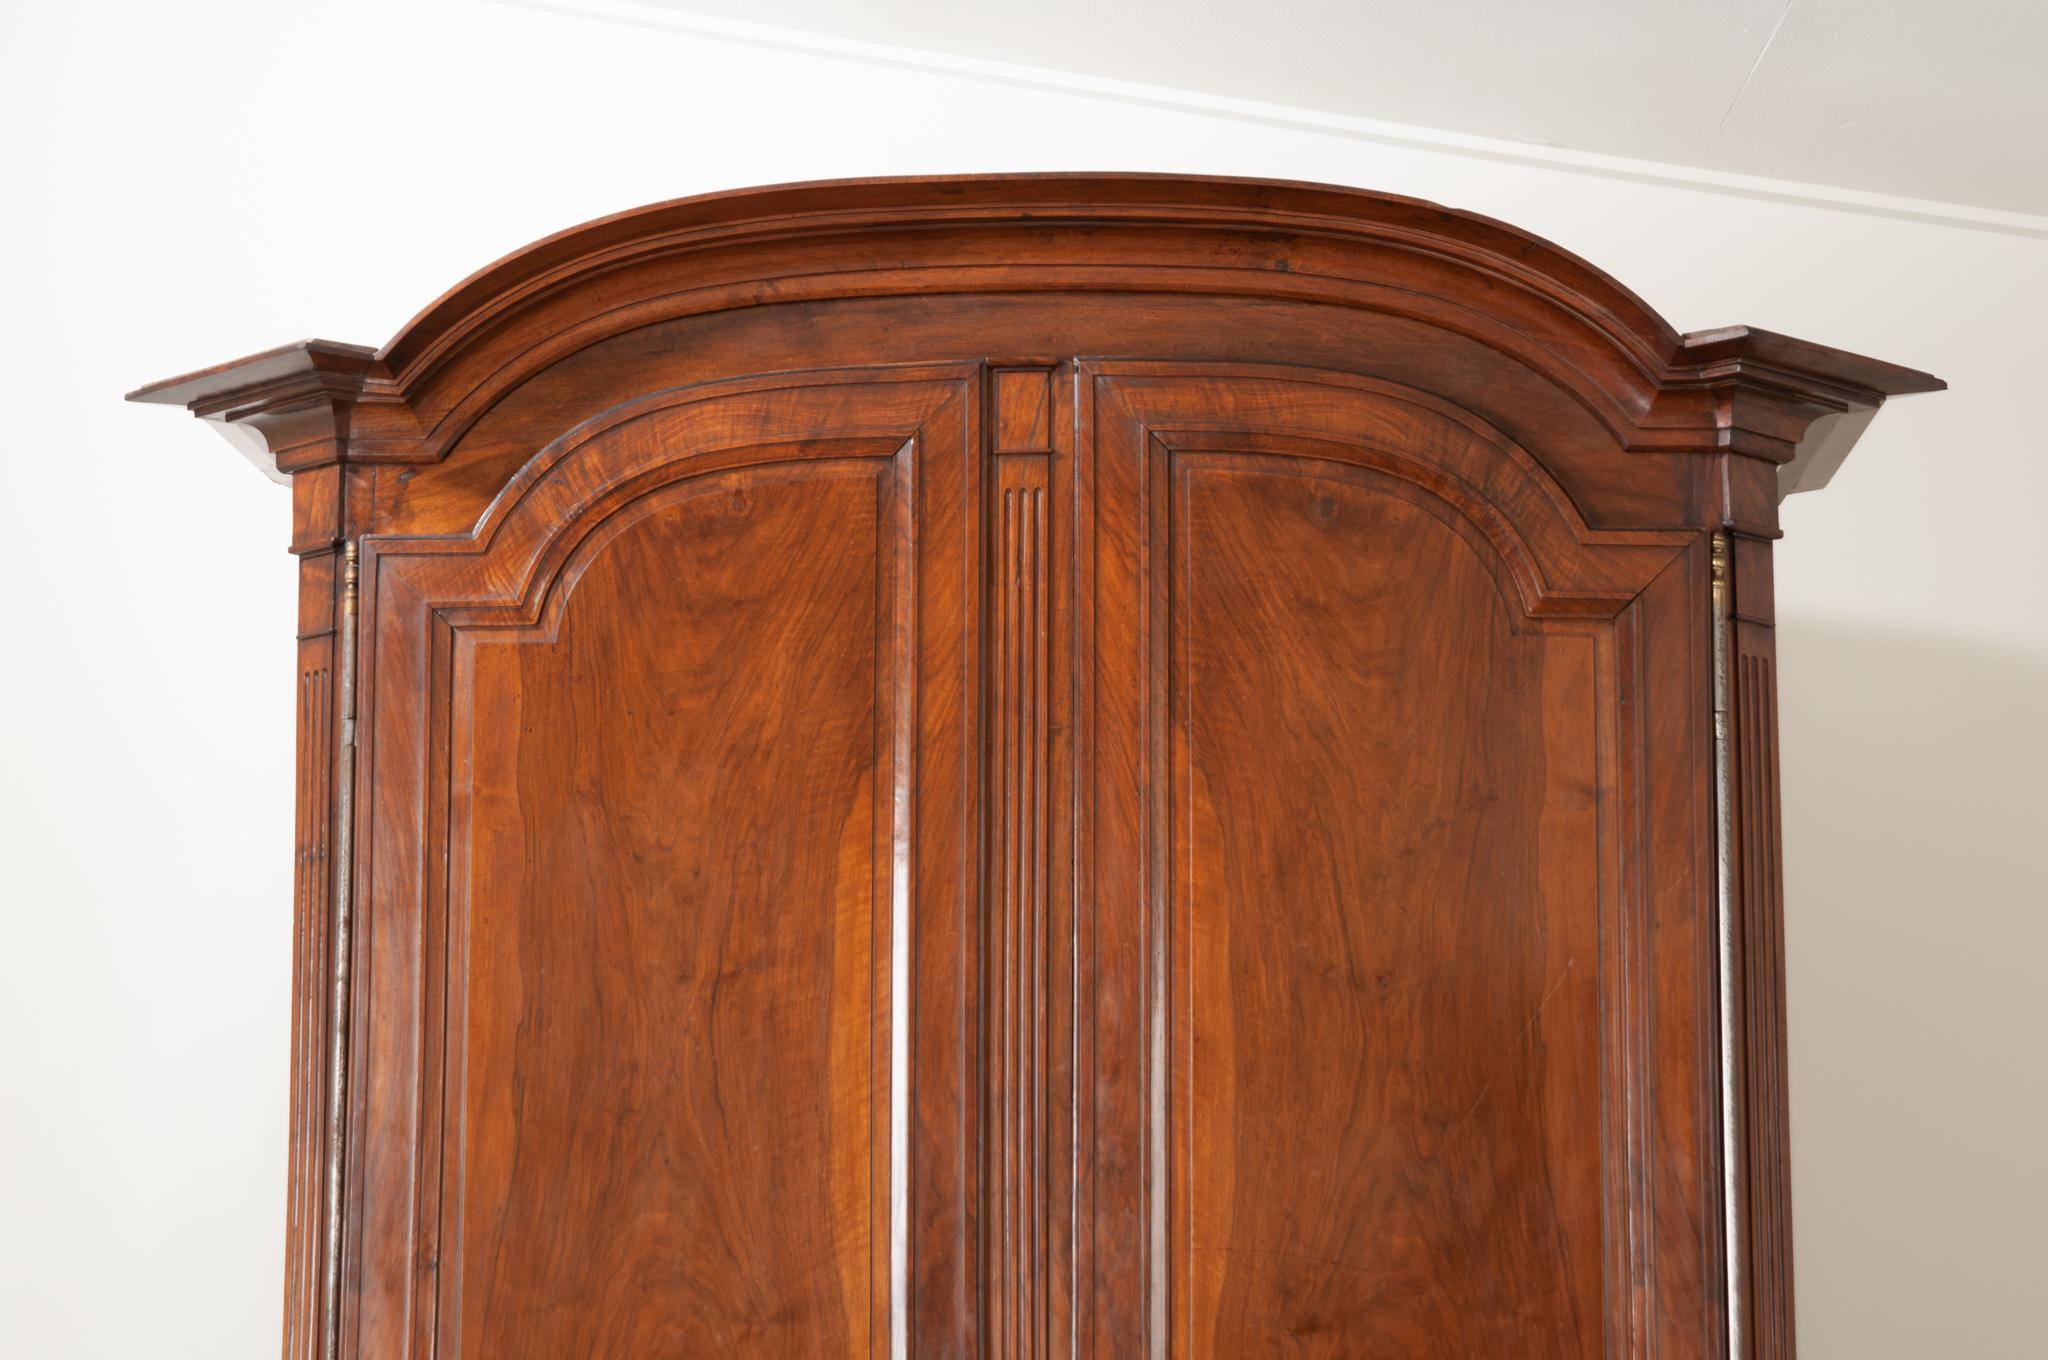 A spectacular solid walnut armoire, made in France towards the beginning of the 19th Century. The large case antique is crowned with a Chapeau de la Champ style bonnet - named after the hats worn by French military field officers of the time. The